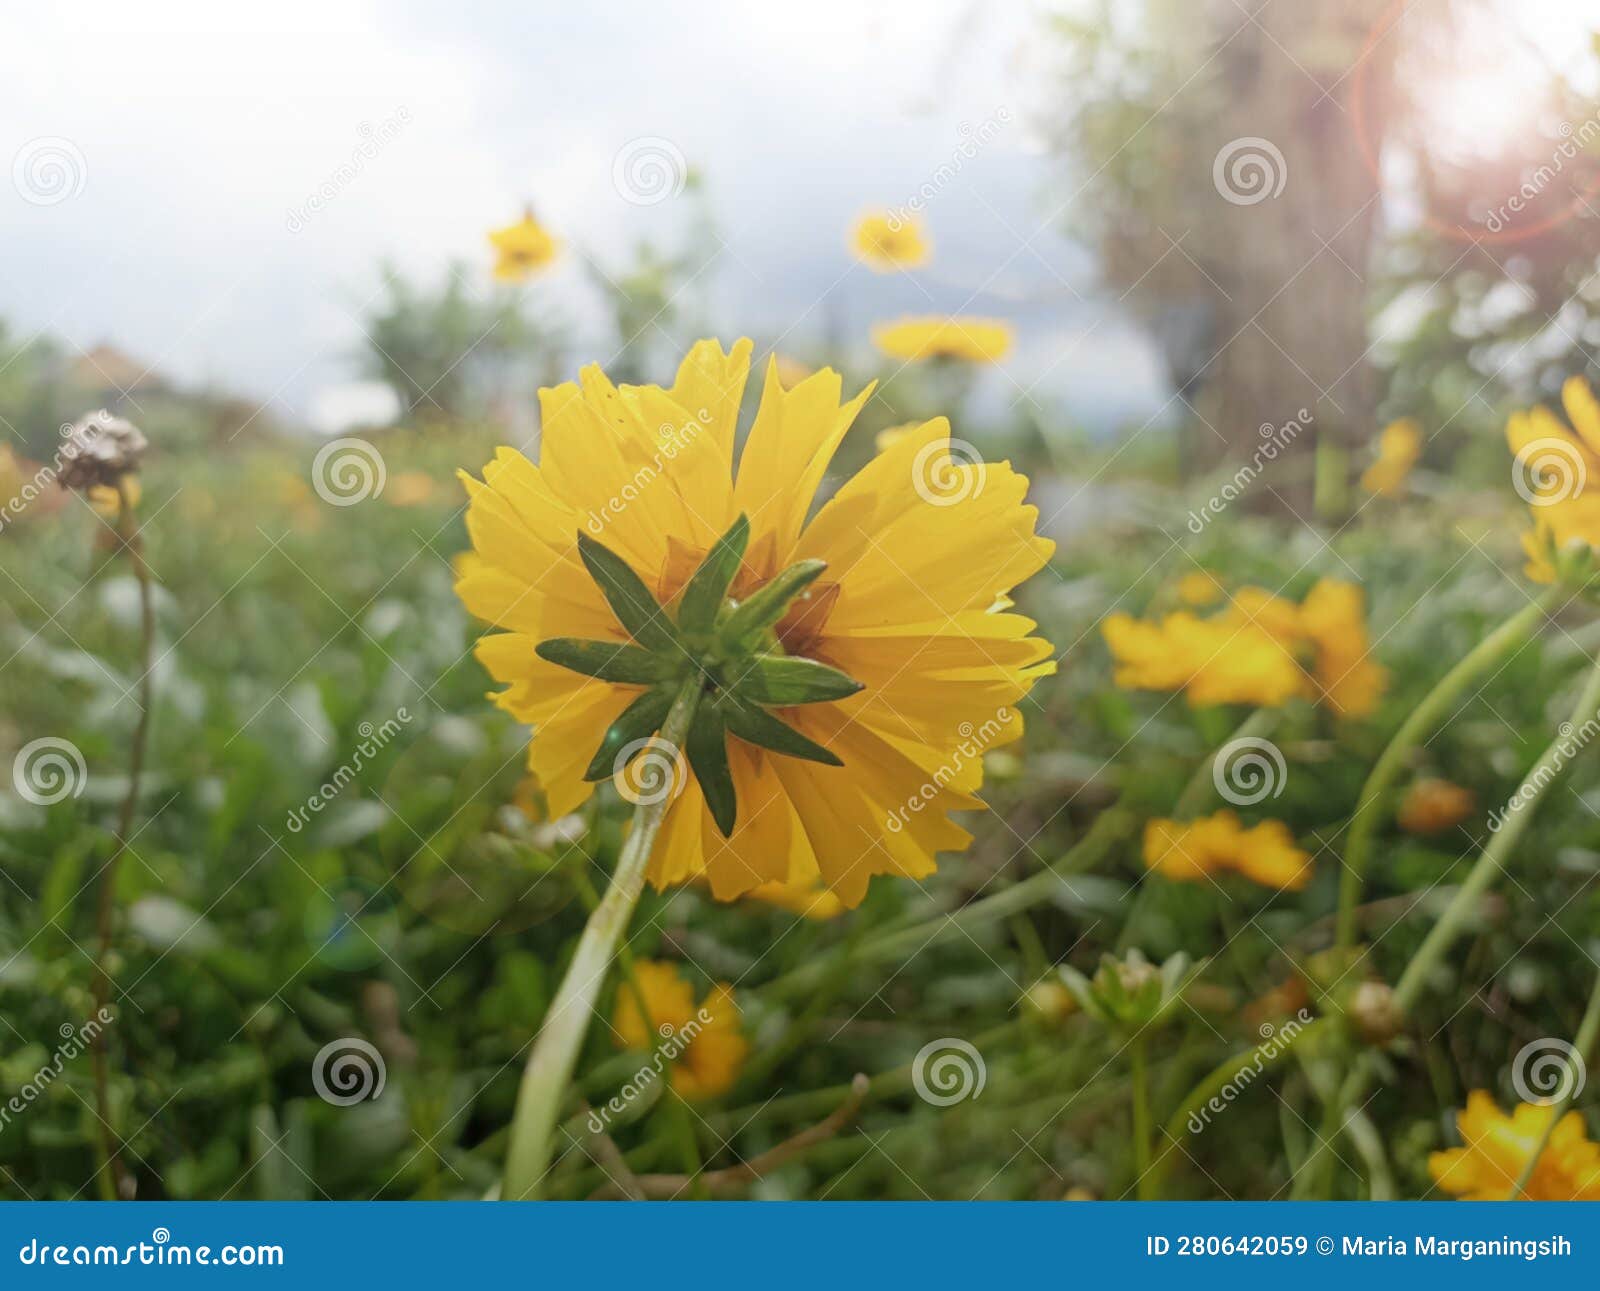 blurry soft background of yellow cosmos flowers. low back angle of yellow garden cosmos flower. spring or summer flower background